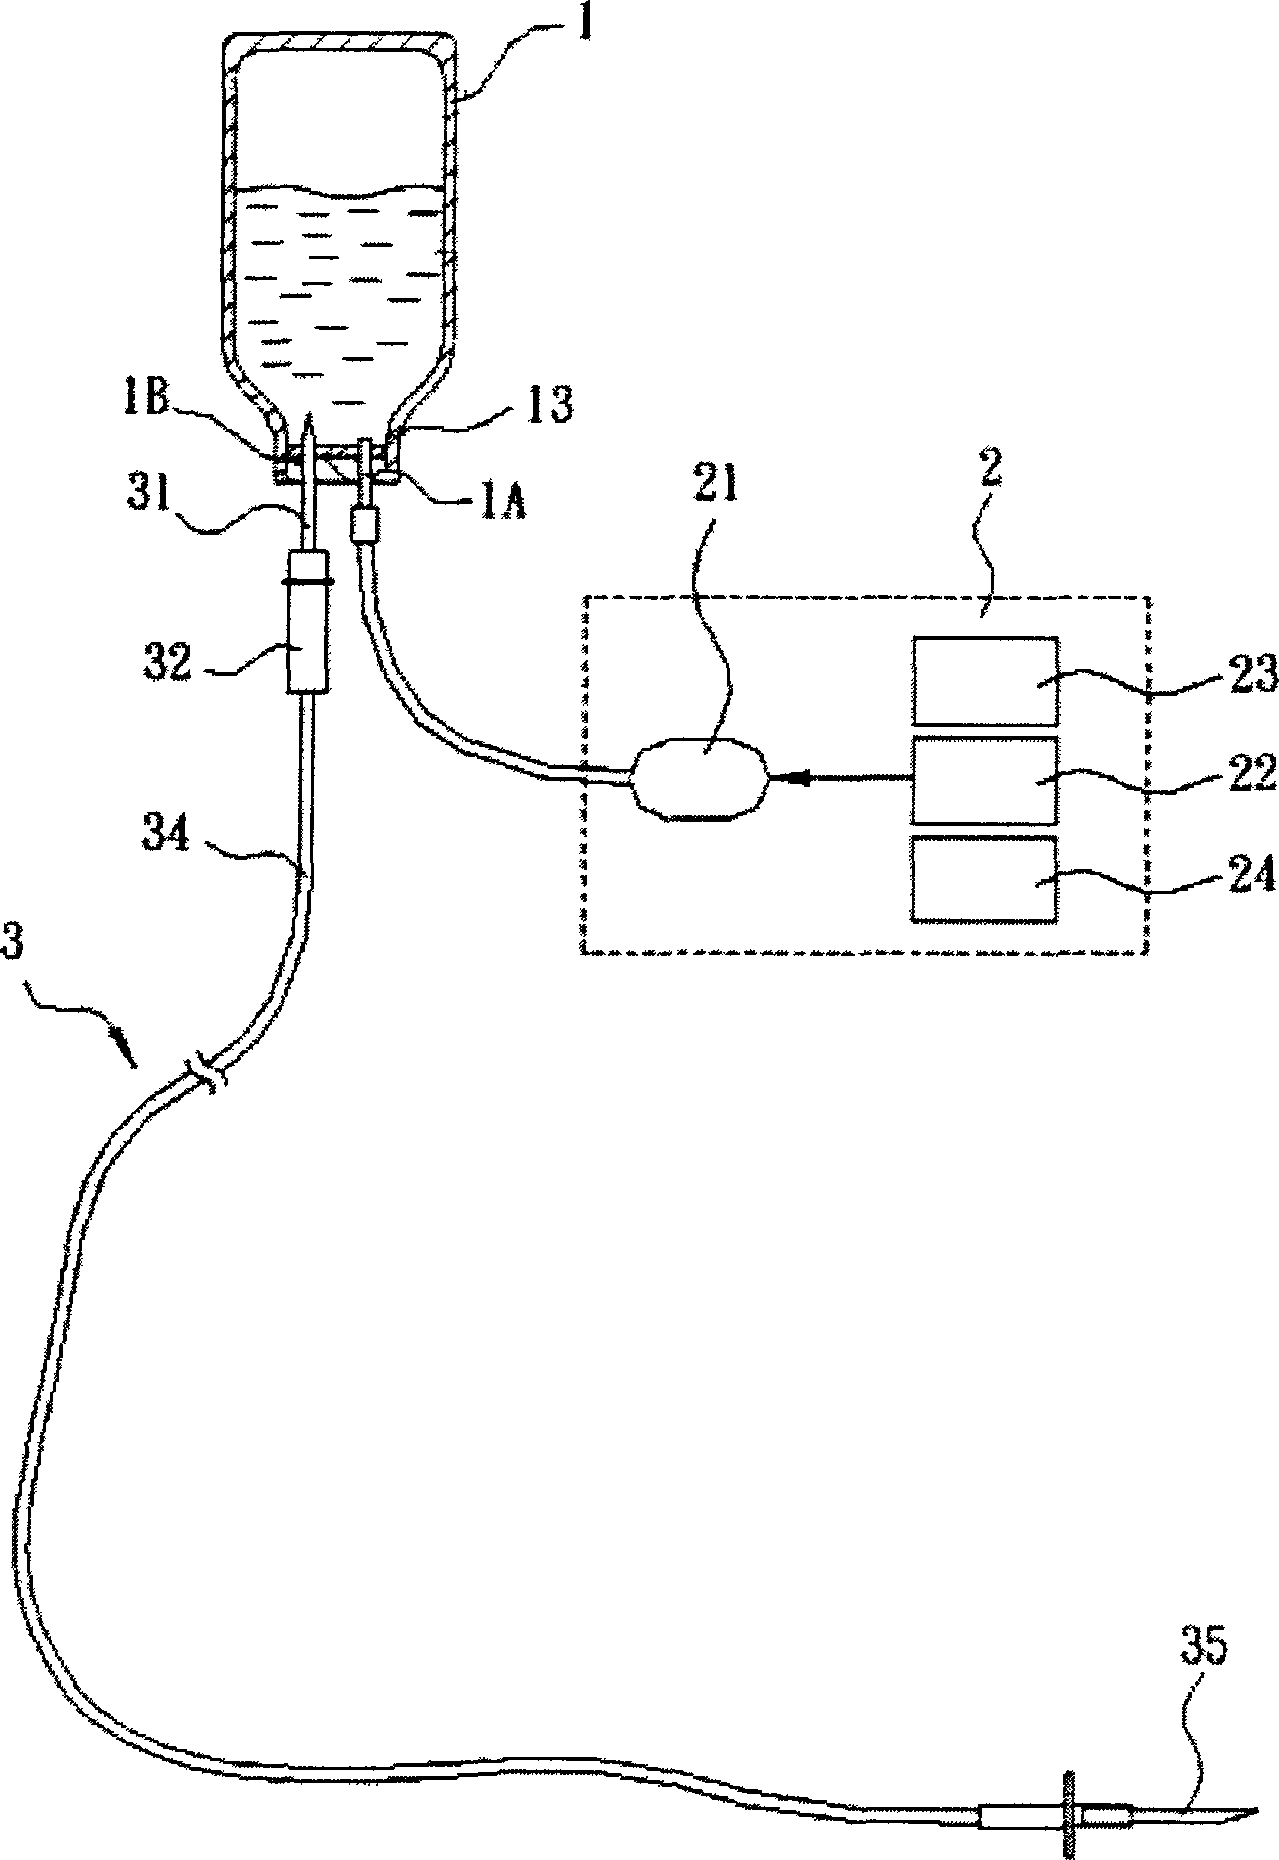 Transfusion injection device